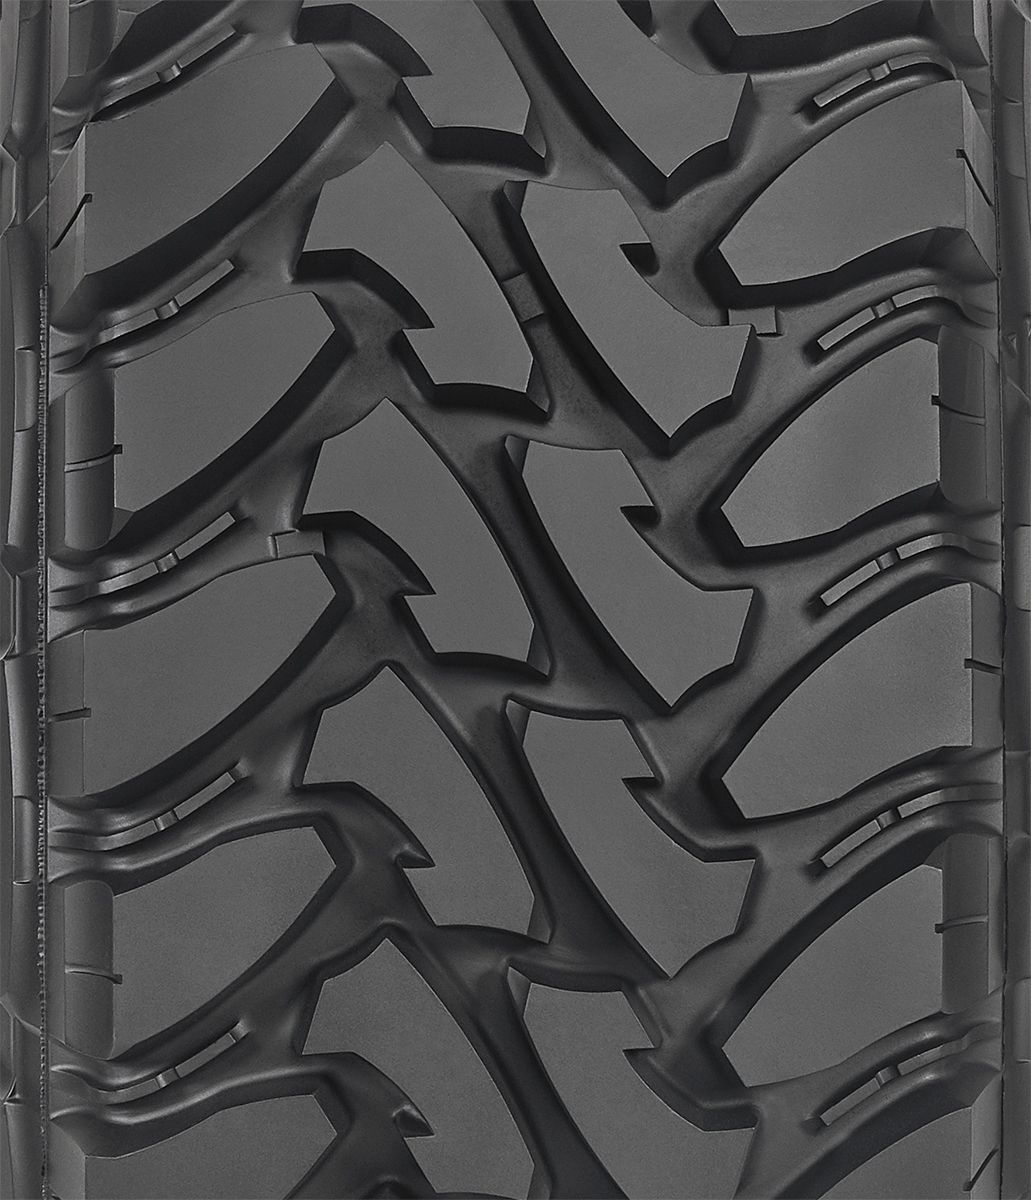 Toyo SXS Open Country Tire - 35X9.5R15